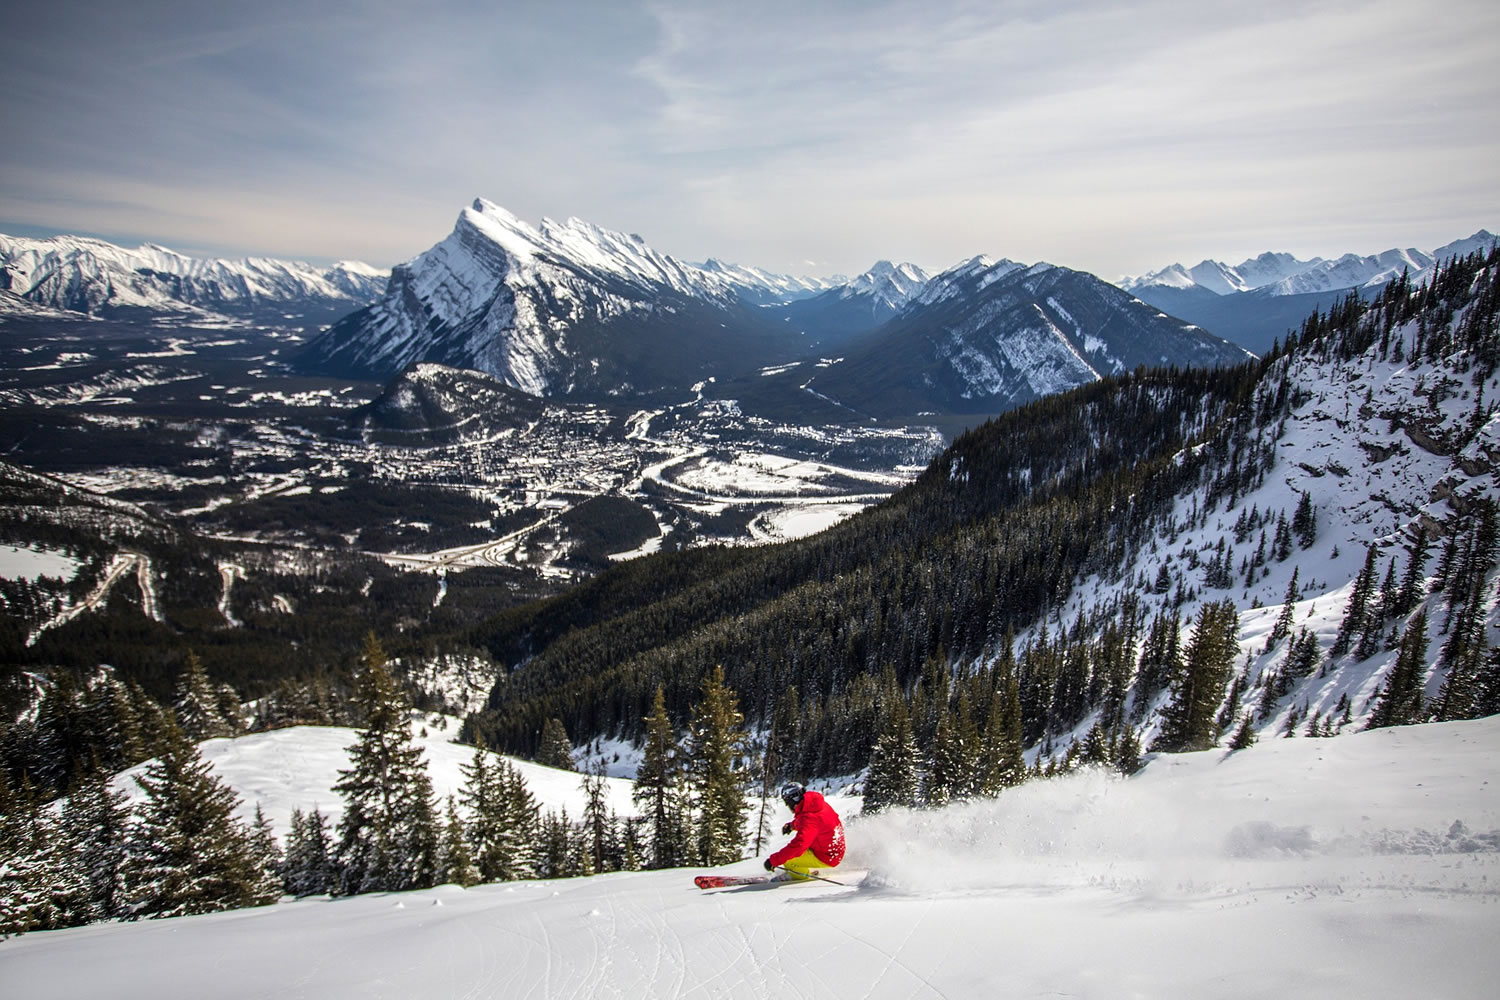 A snowboarder on the mountain in the Canadian Rockies, just 15 minutes from the town of Banff, Alberta. It?s one of a number of small resorts located near larger, big-name resorts.